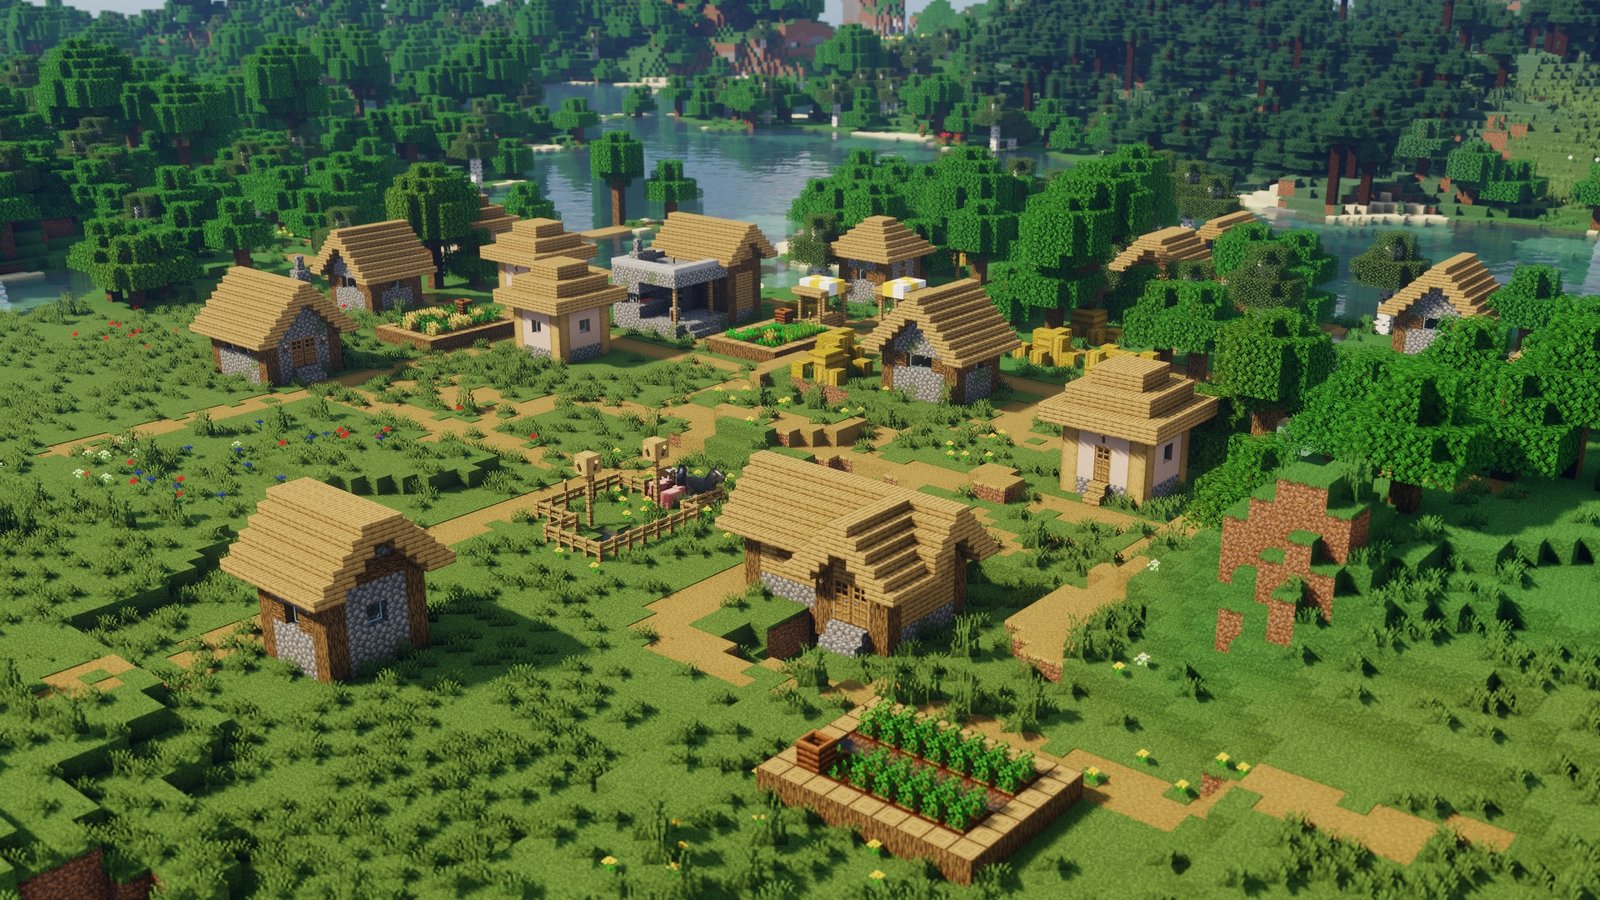 Minecraft shaders - an overhead view of a village during the day, houses and blocks casting shadows on the ground